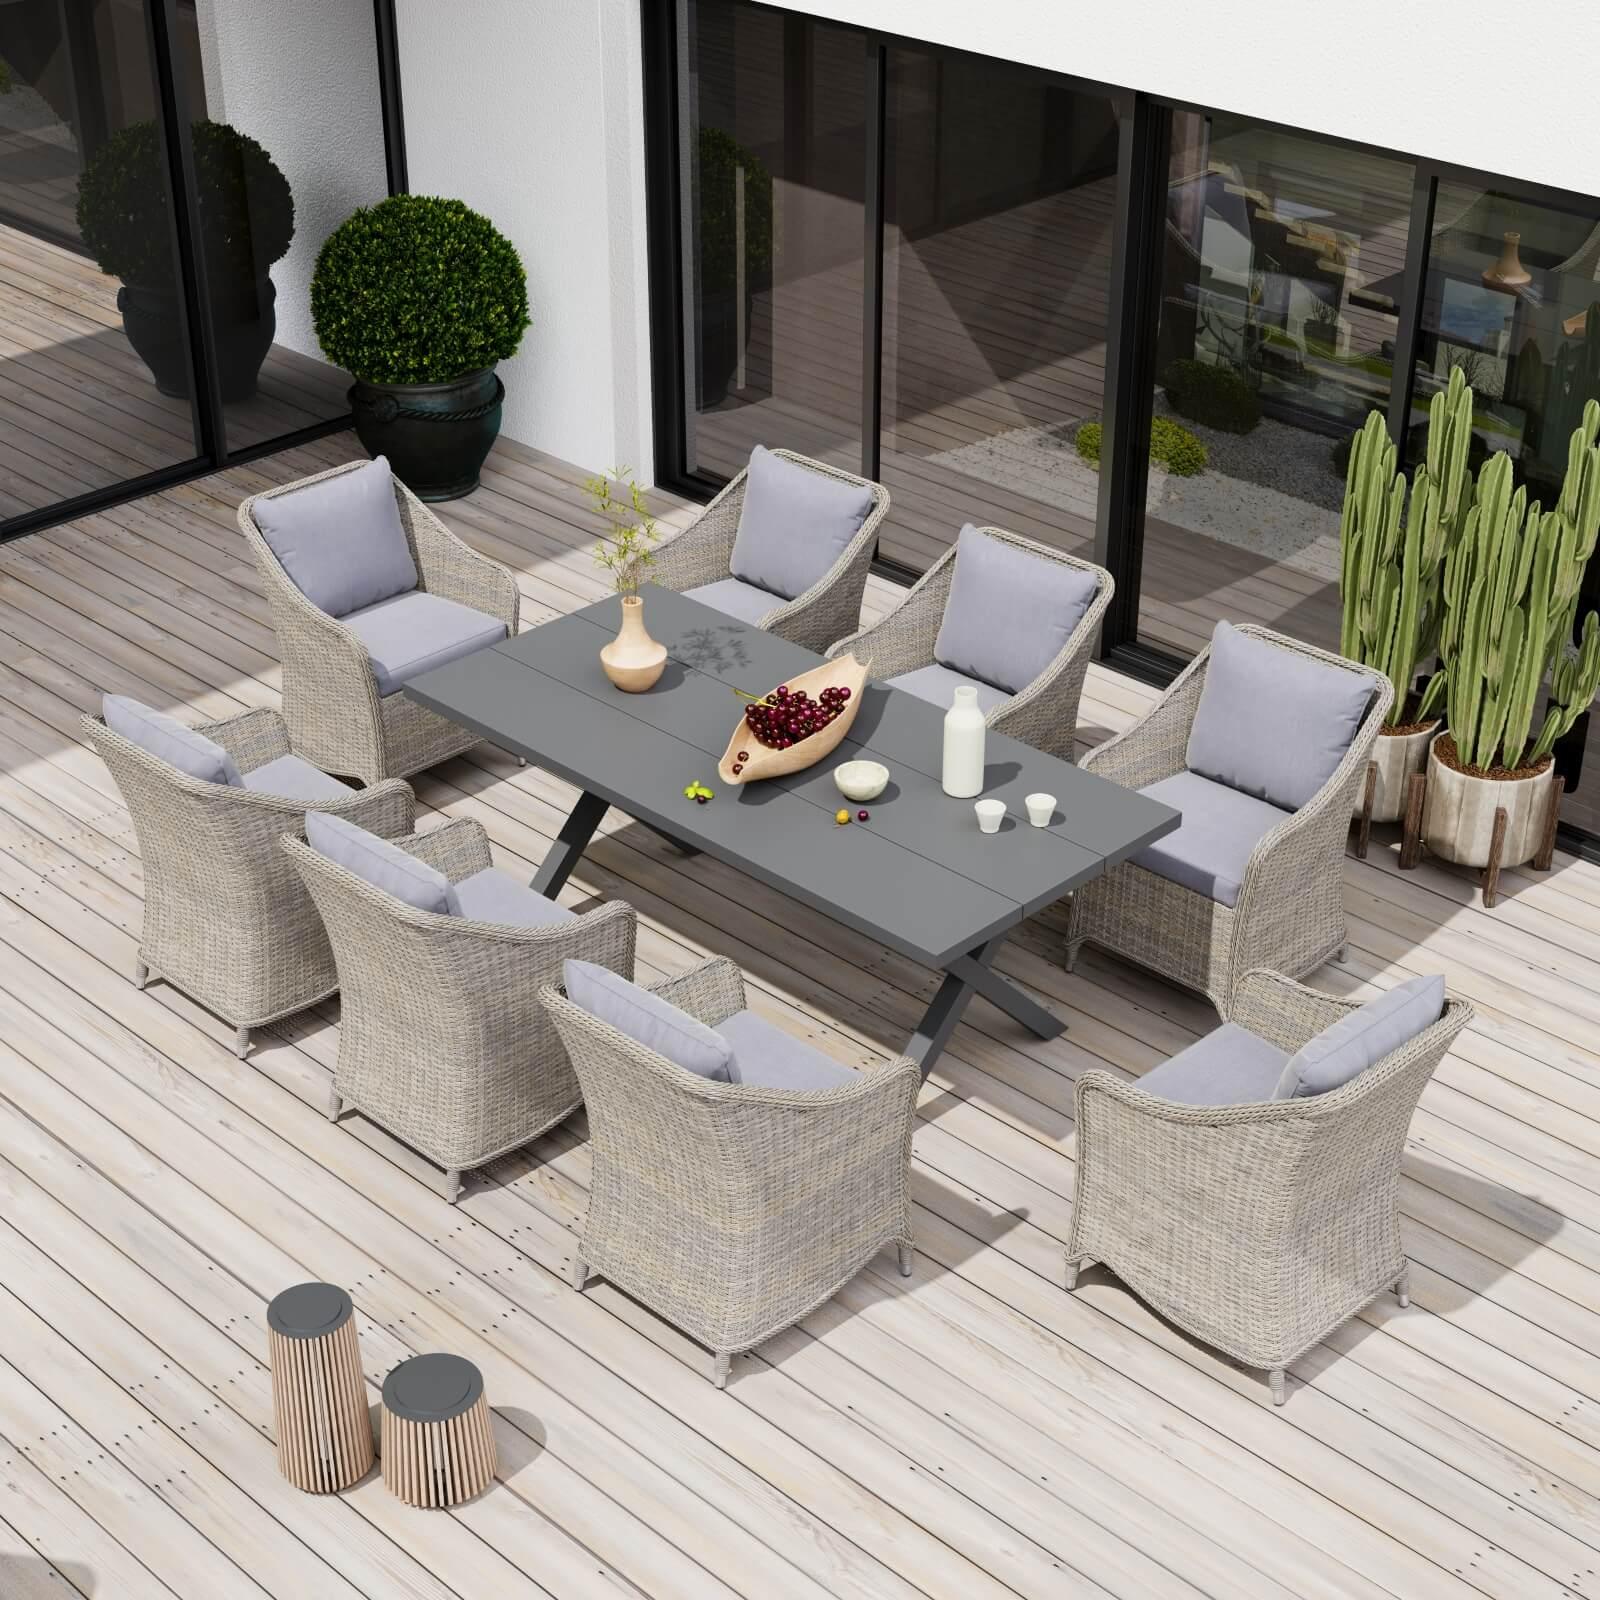 Irati grey wicker outdoor dining set with aluminum frame, grey cushions, 8 dining chairs , 1 X-shaped dining table - Jardina Furniture#color_Grey